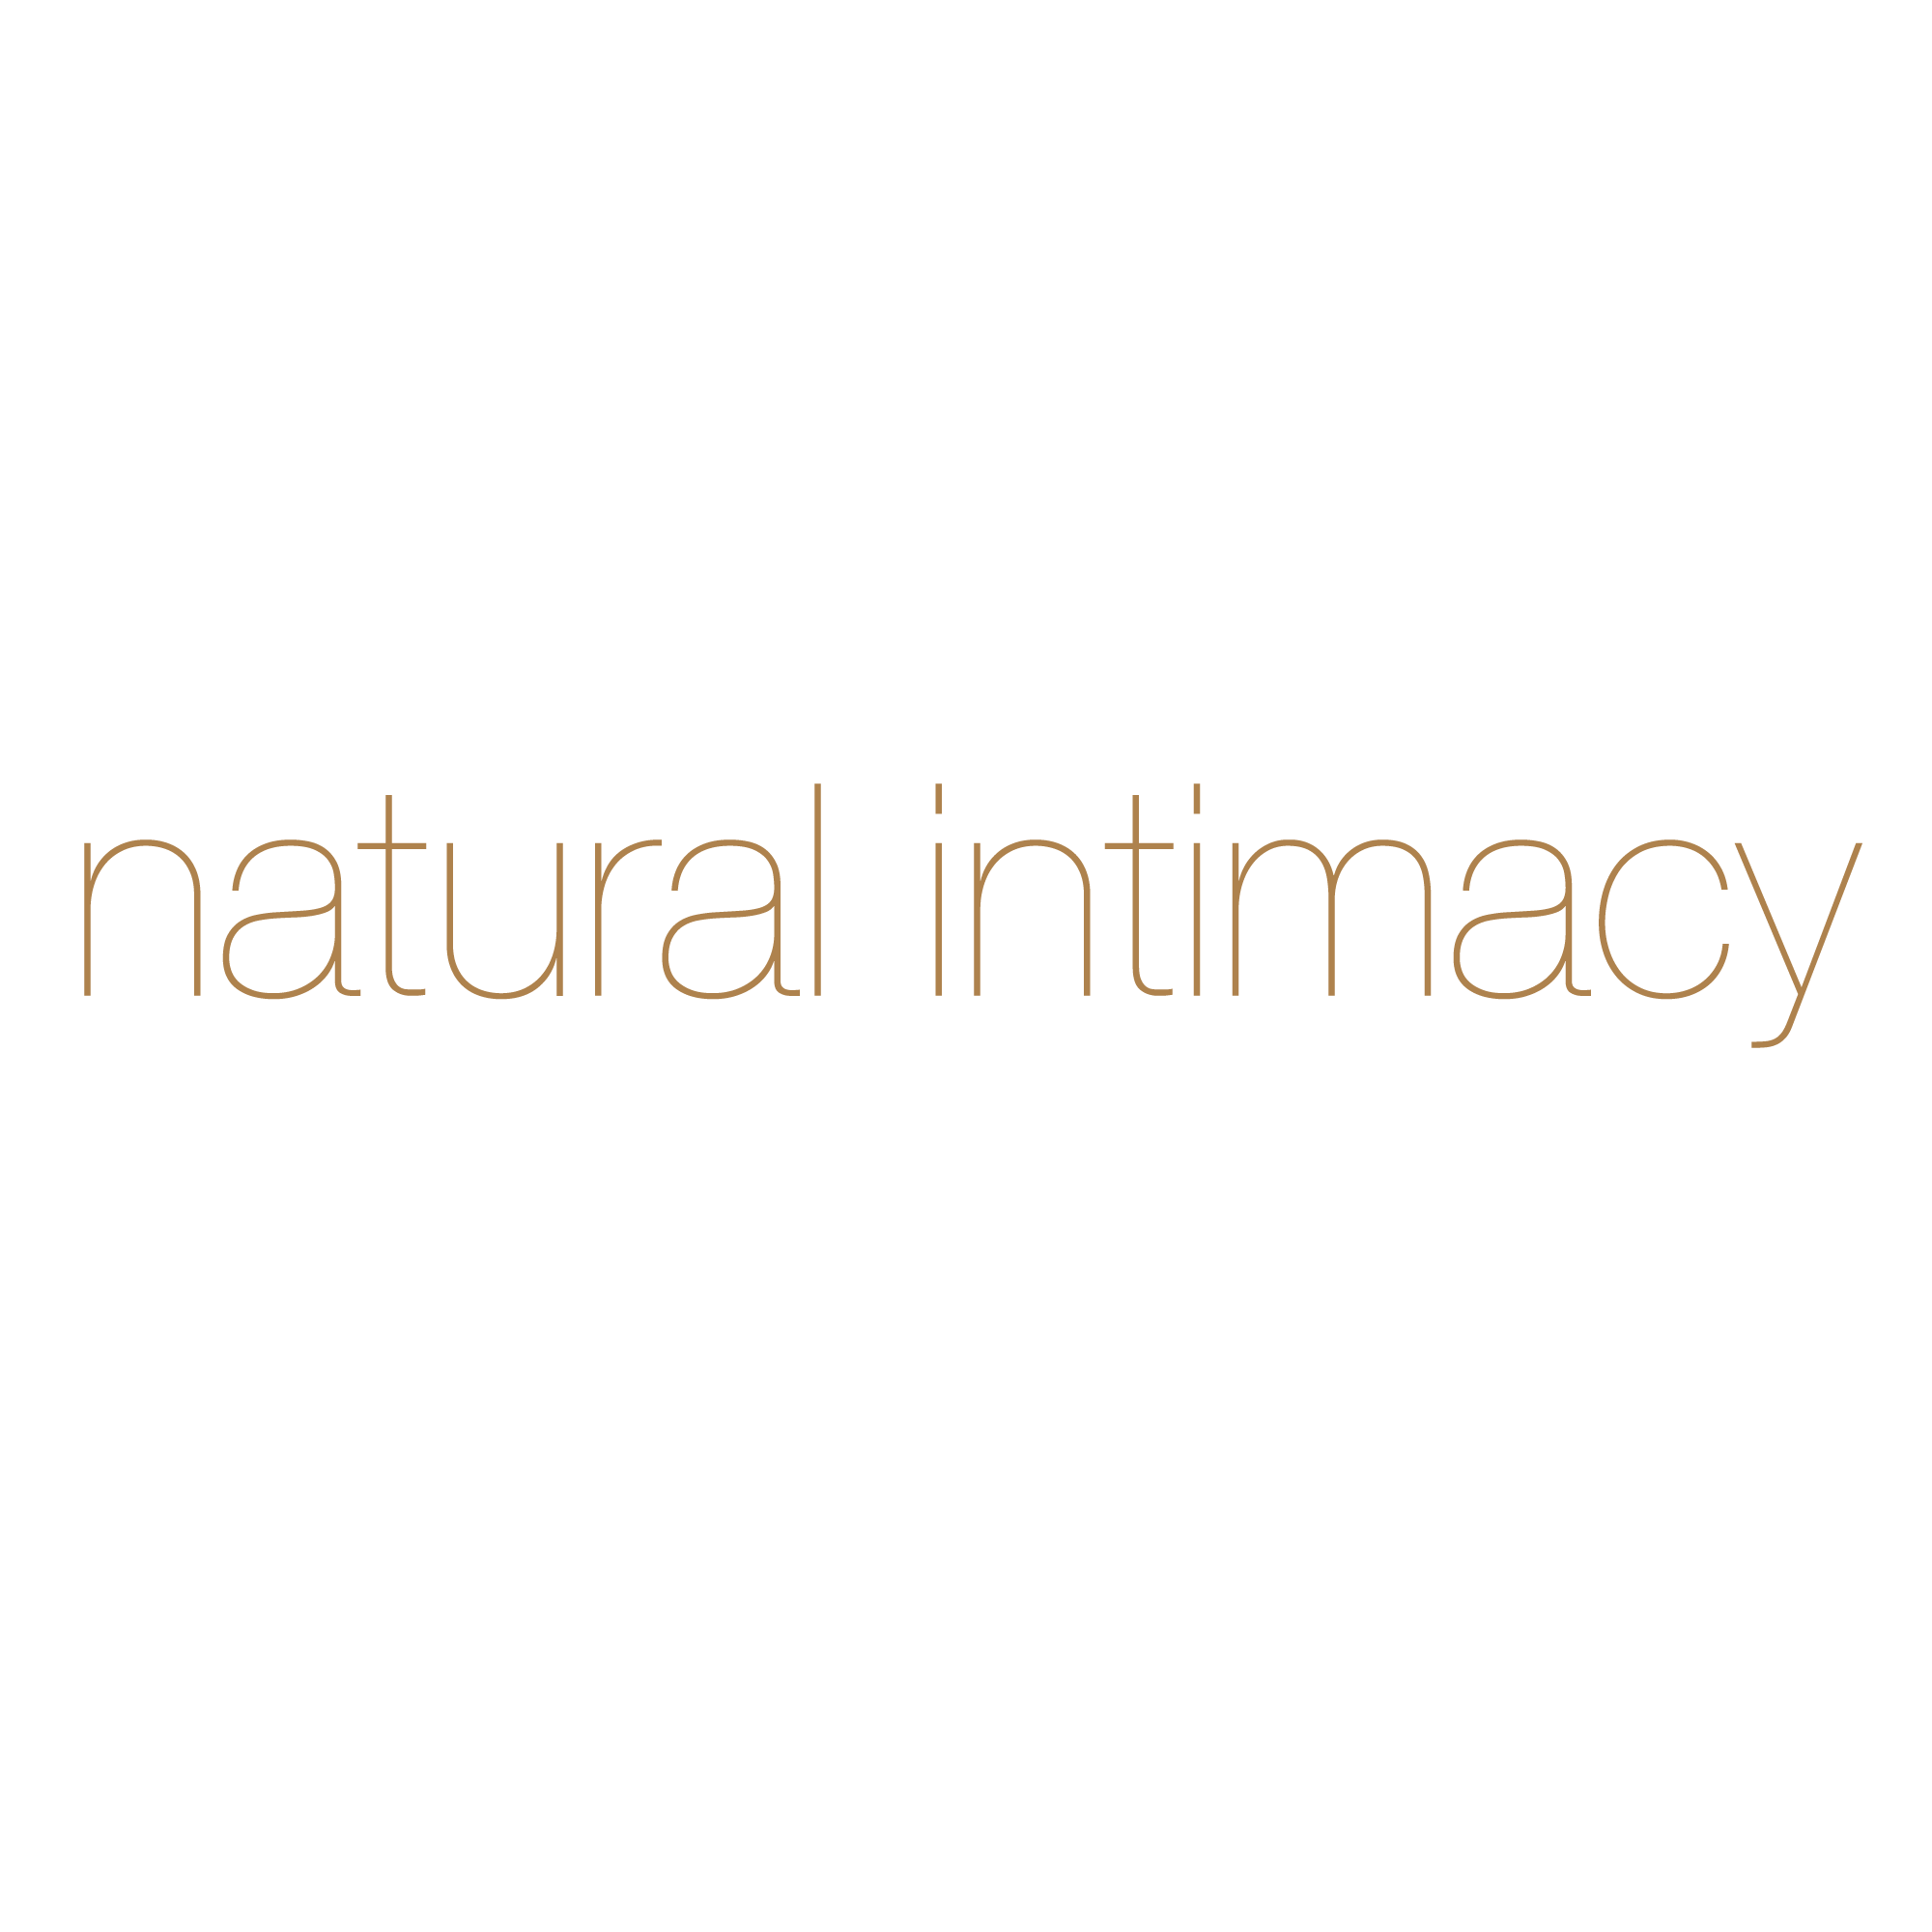 Natural Intimacy